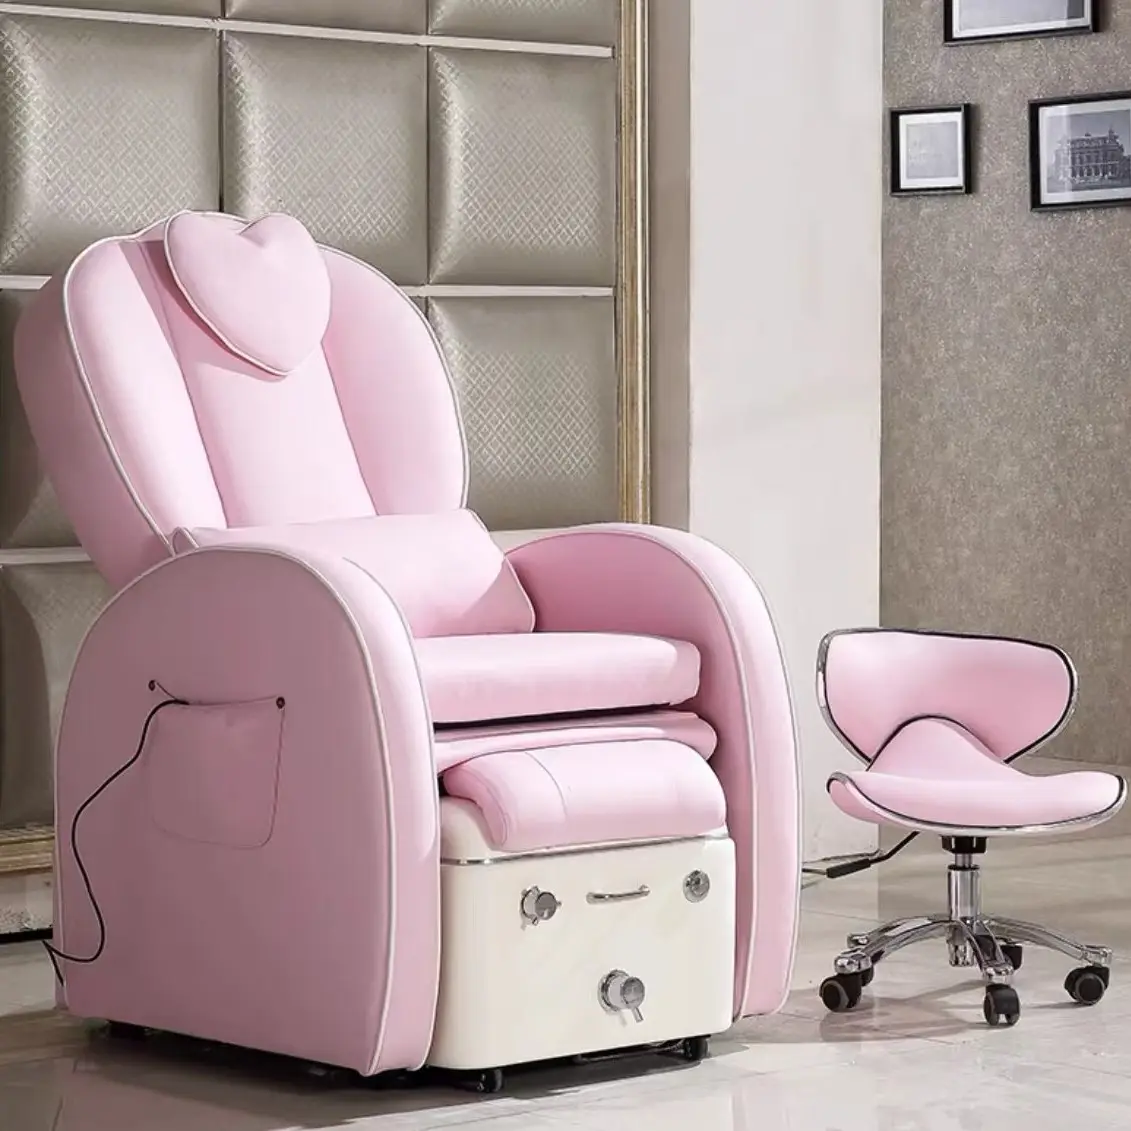 Fabricante Beauty Nail Salon Furniture No Plomería Luxury Pink Relax Massage Foot Spa Pedicure Chair